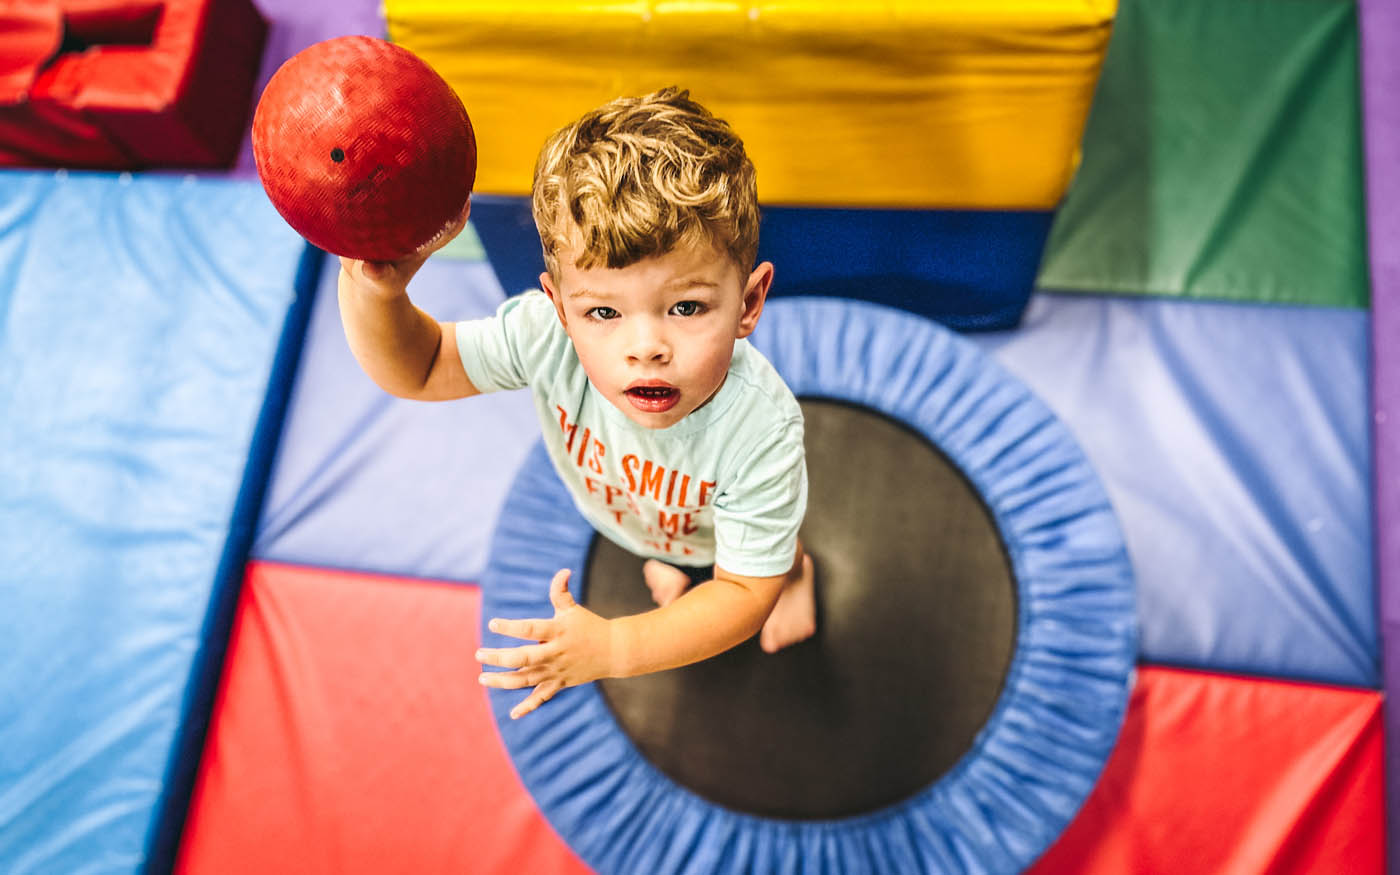 A toddler jumping on a Romp n' Roll tramp, learn more about our kids activities.